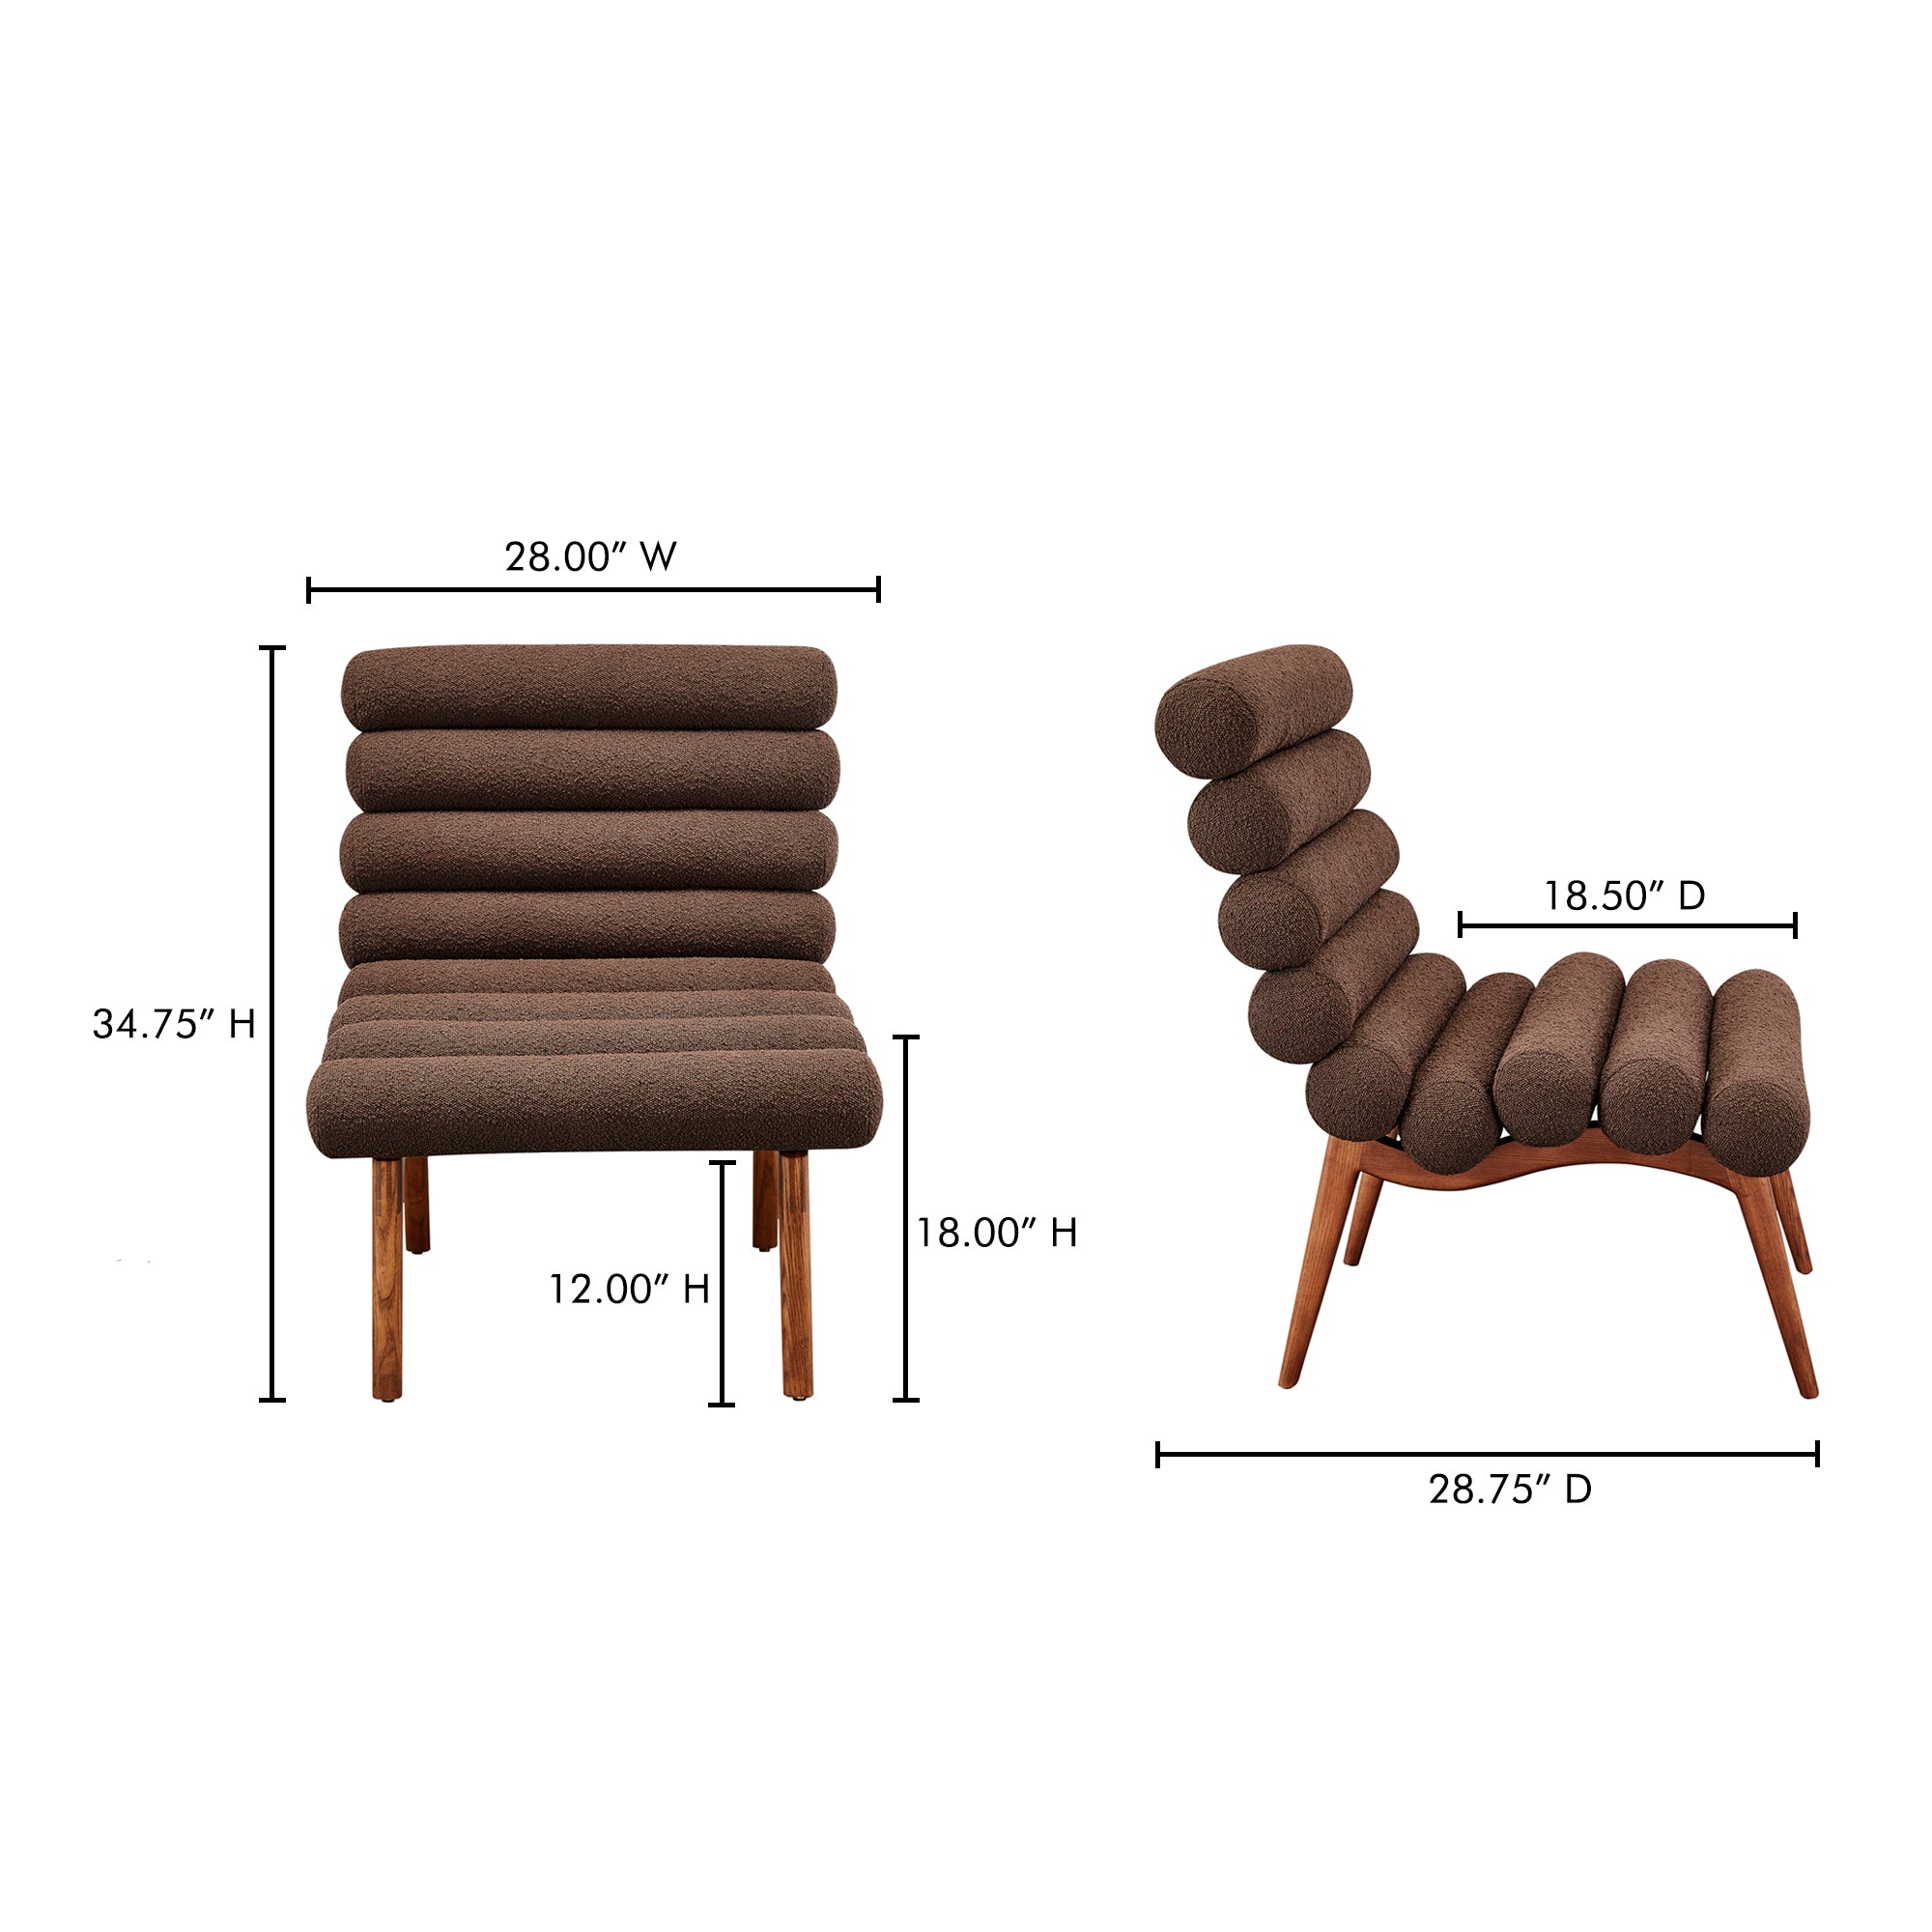 Arlo Accent Chair Deep Brown